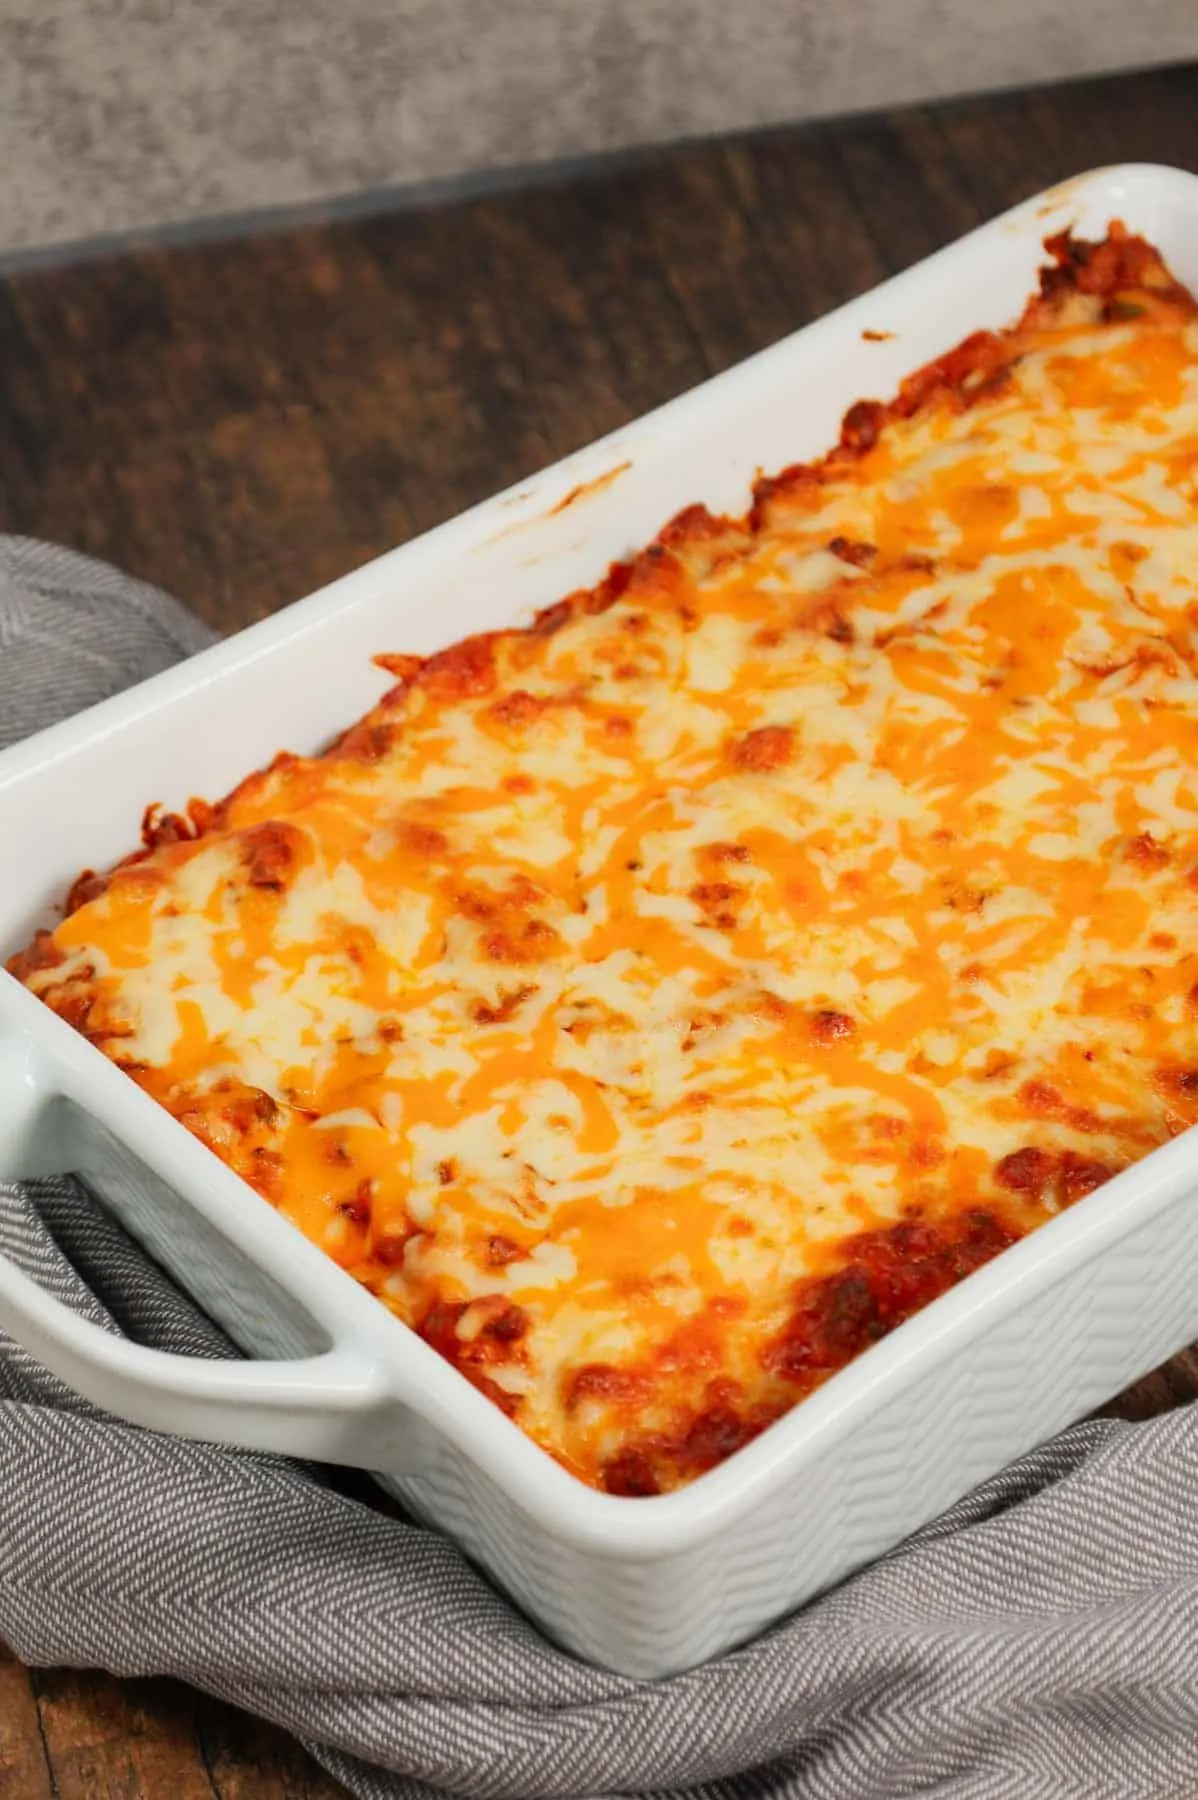 Grandma's Ground Beef Casserole is a simple and classic hamburger dish made with egg noodles, condensed tomato soup, onions, green bell peppers and cream cheese all baked with shredded mozzarella and cheddar on top.